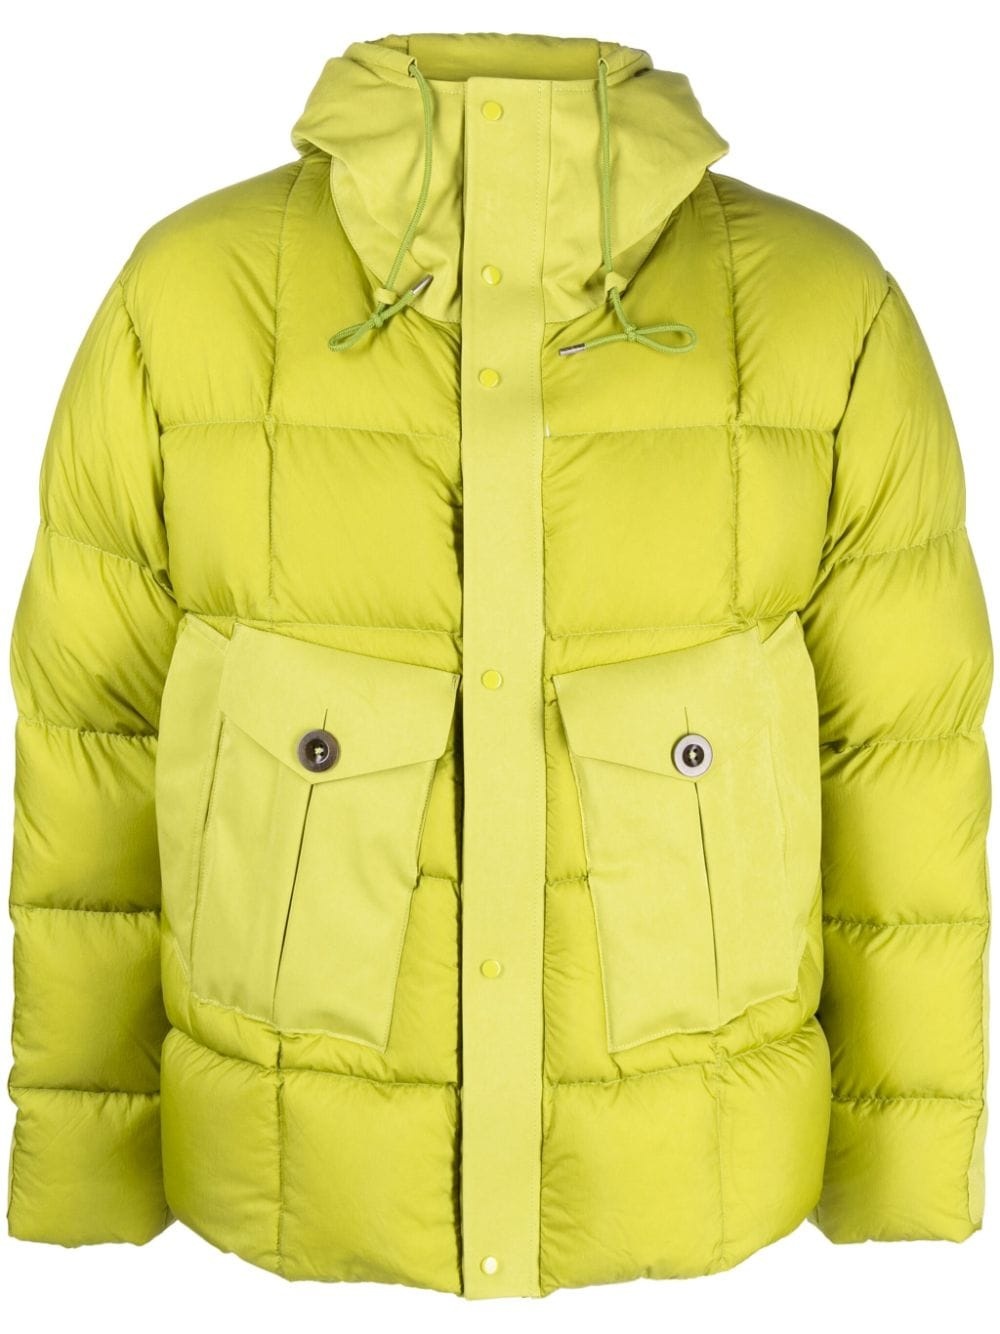 Tempest Combo down jacket - 1